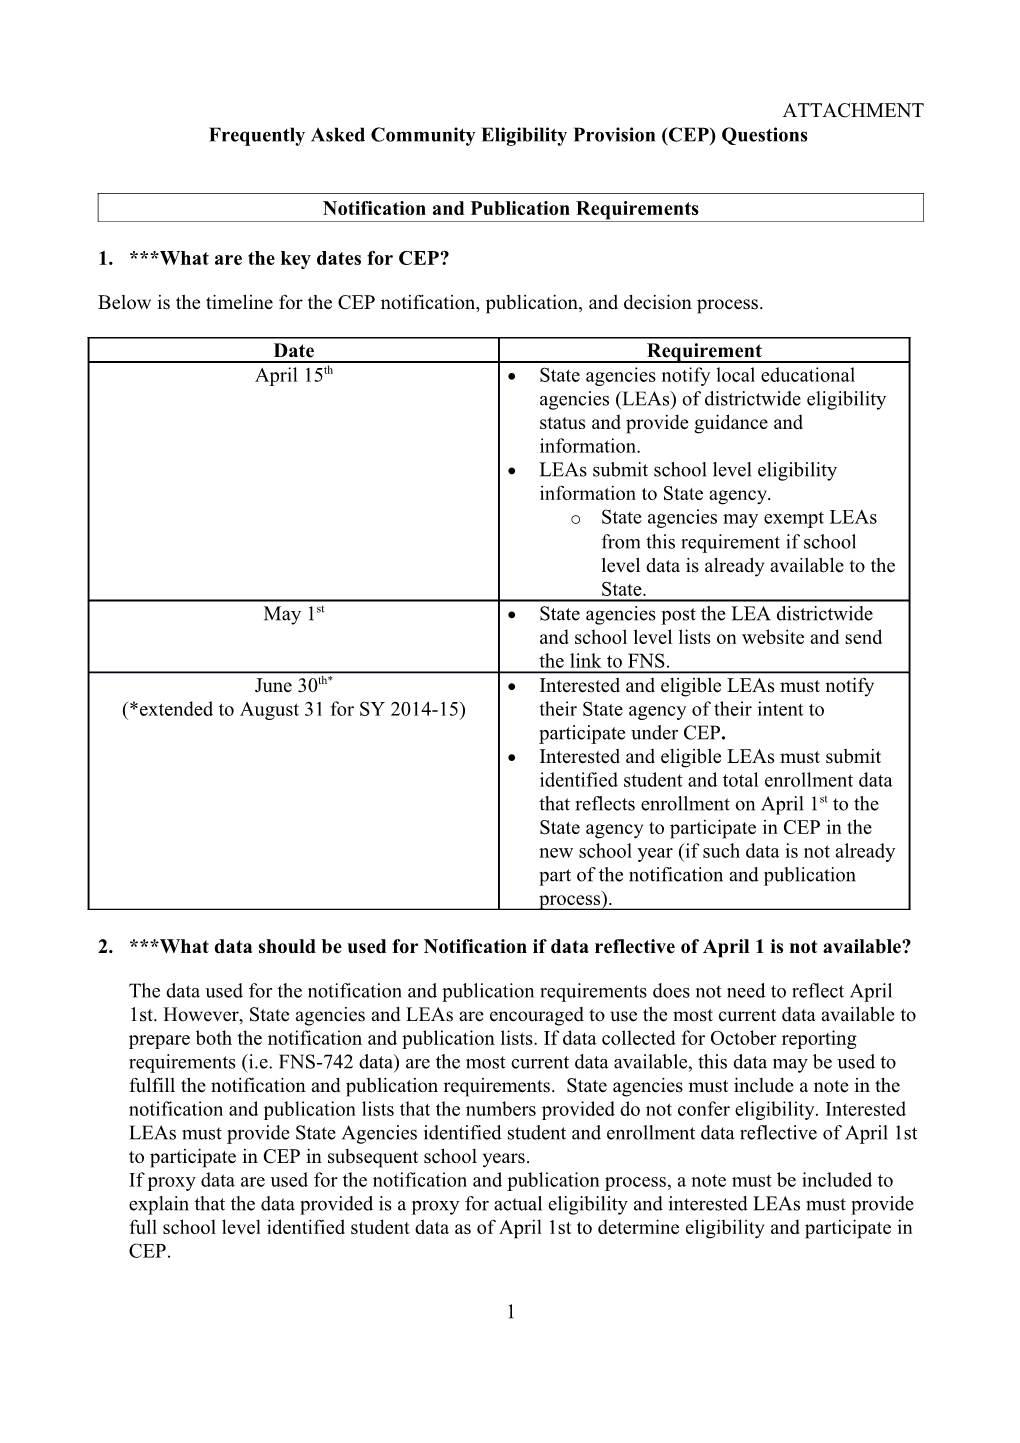 SP 21-2014(V.2):Community Eligibility Provision: Guidance and Q&As - Revised